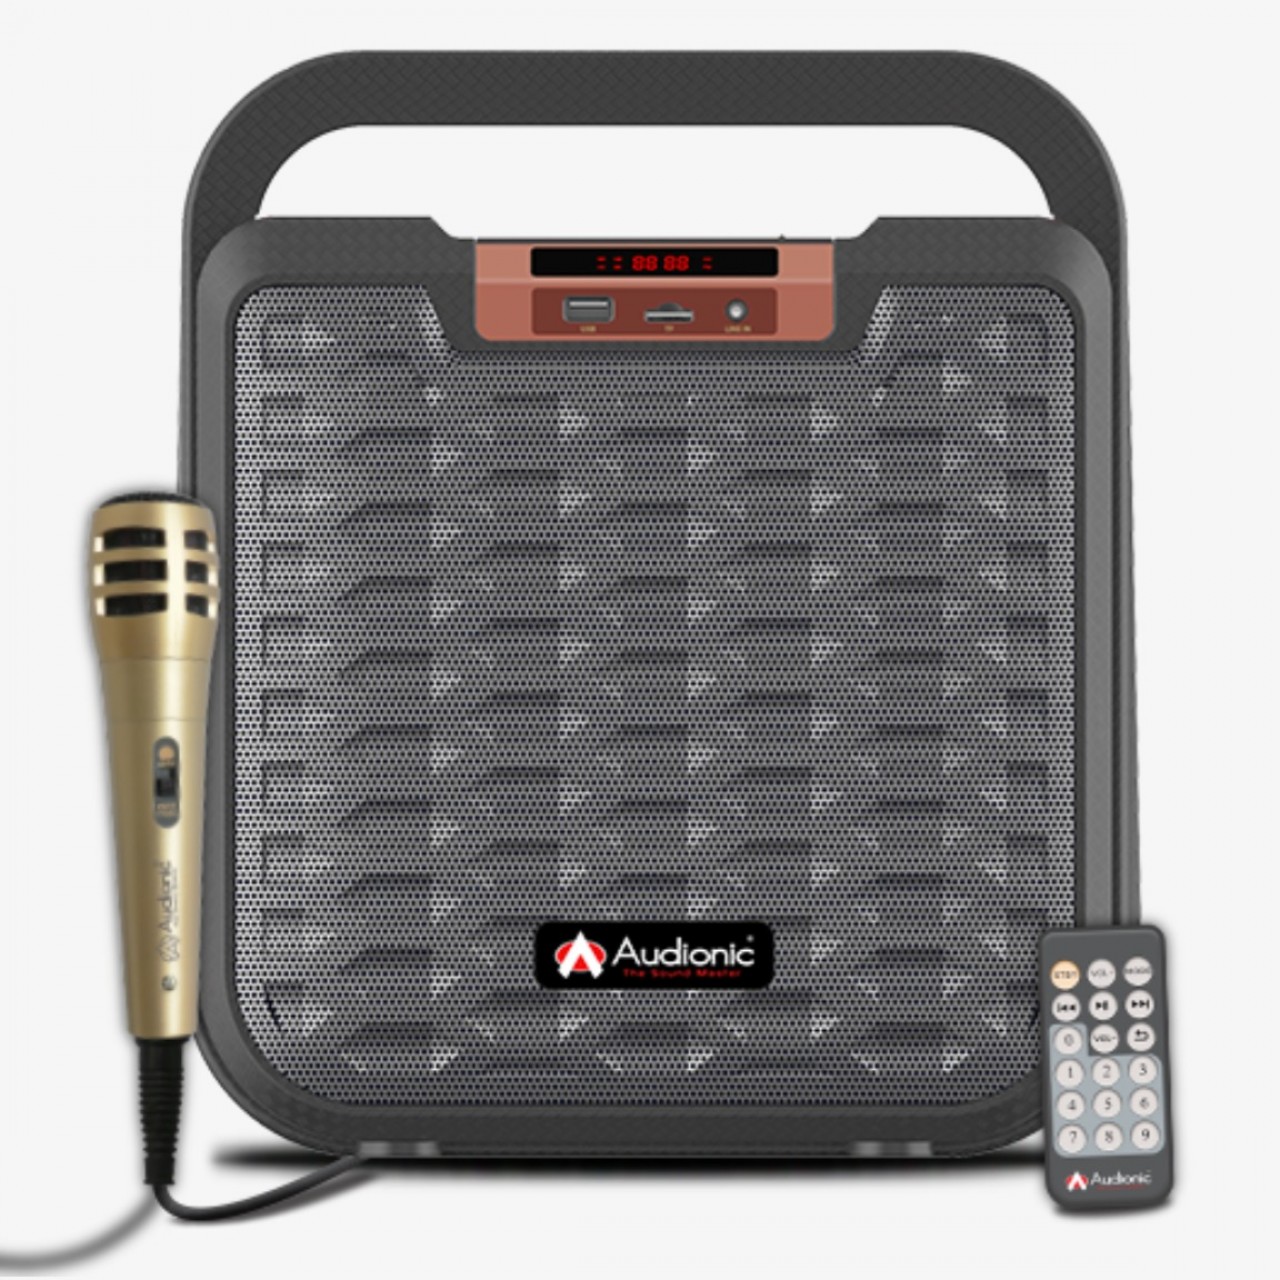 Audionic Mh 10 Bluetooth Speaker with mic